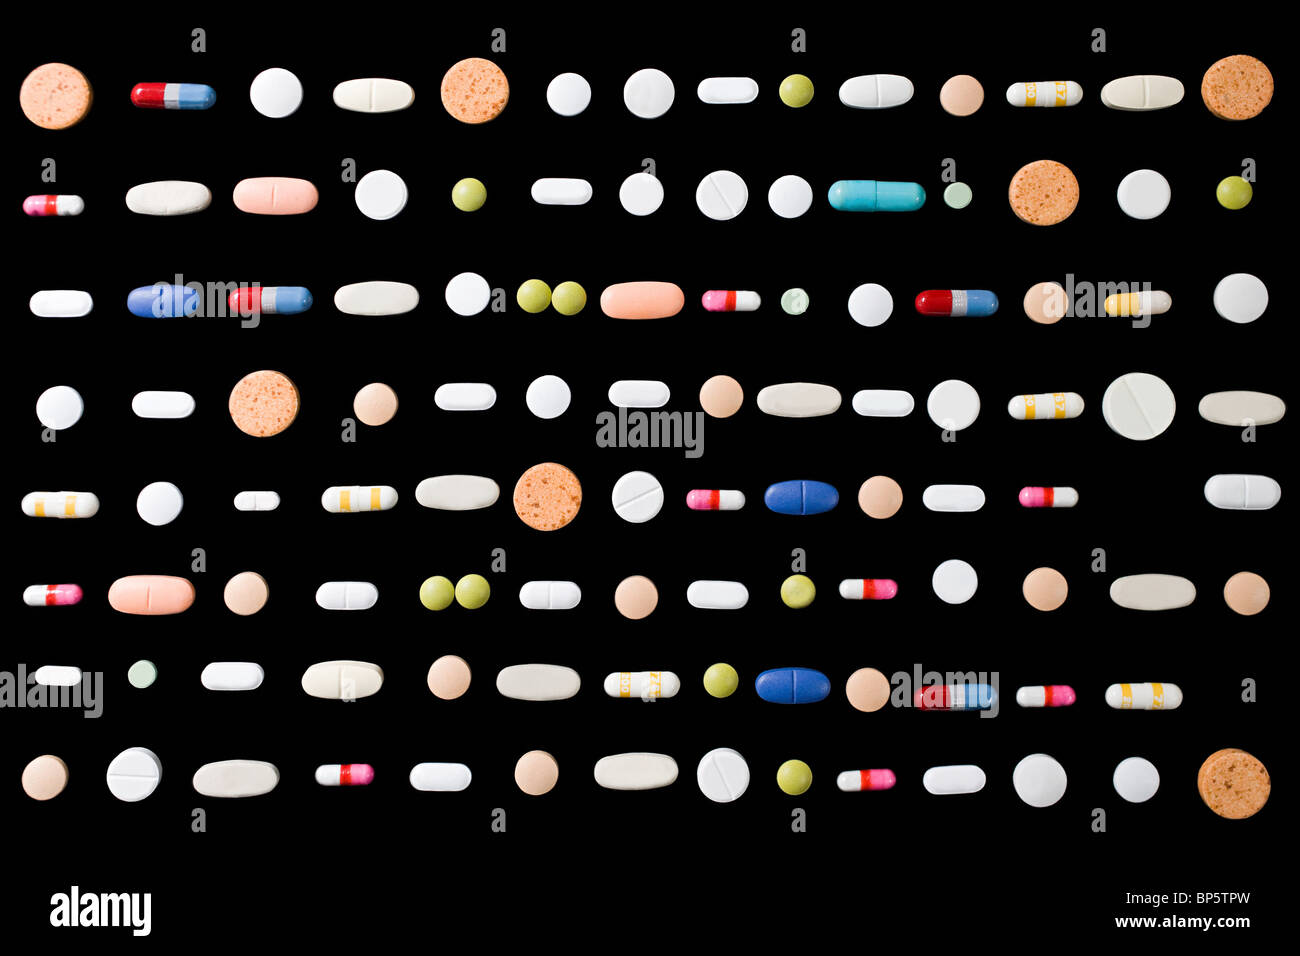 Rows of pills on black background Stock Photo